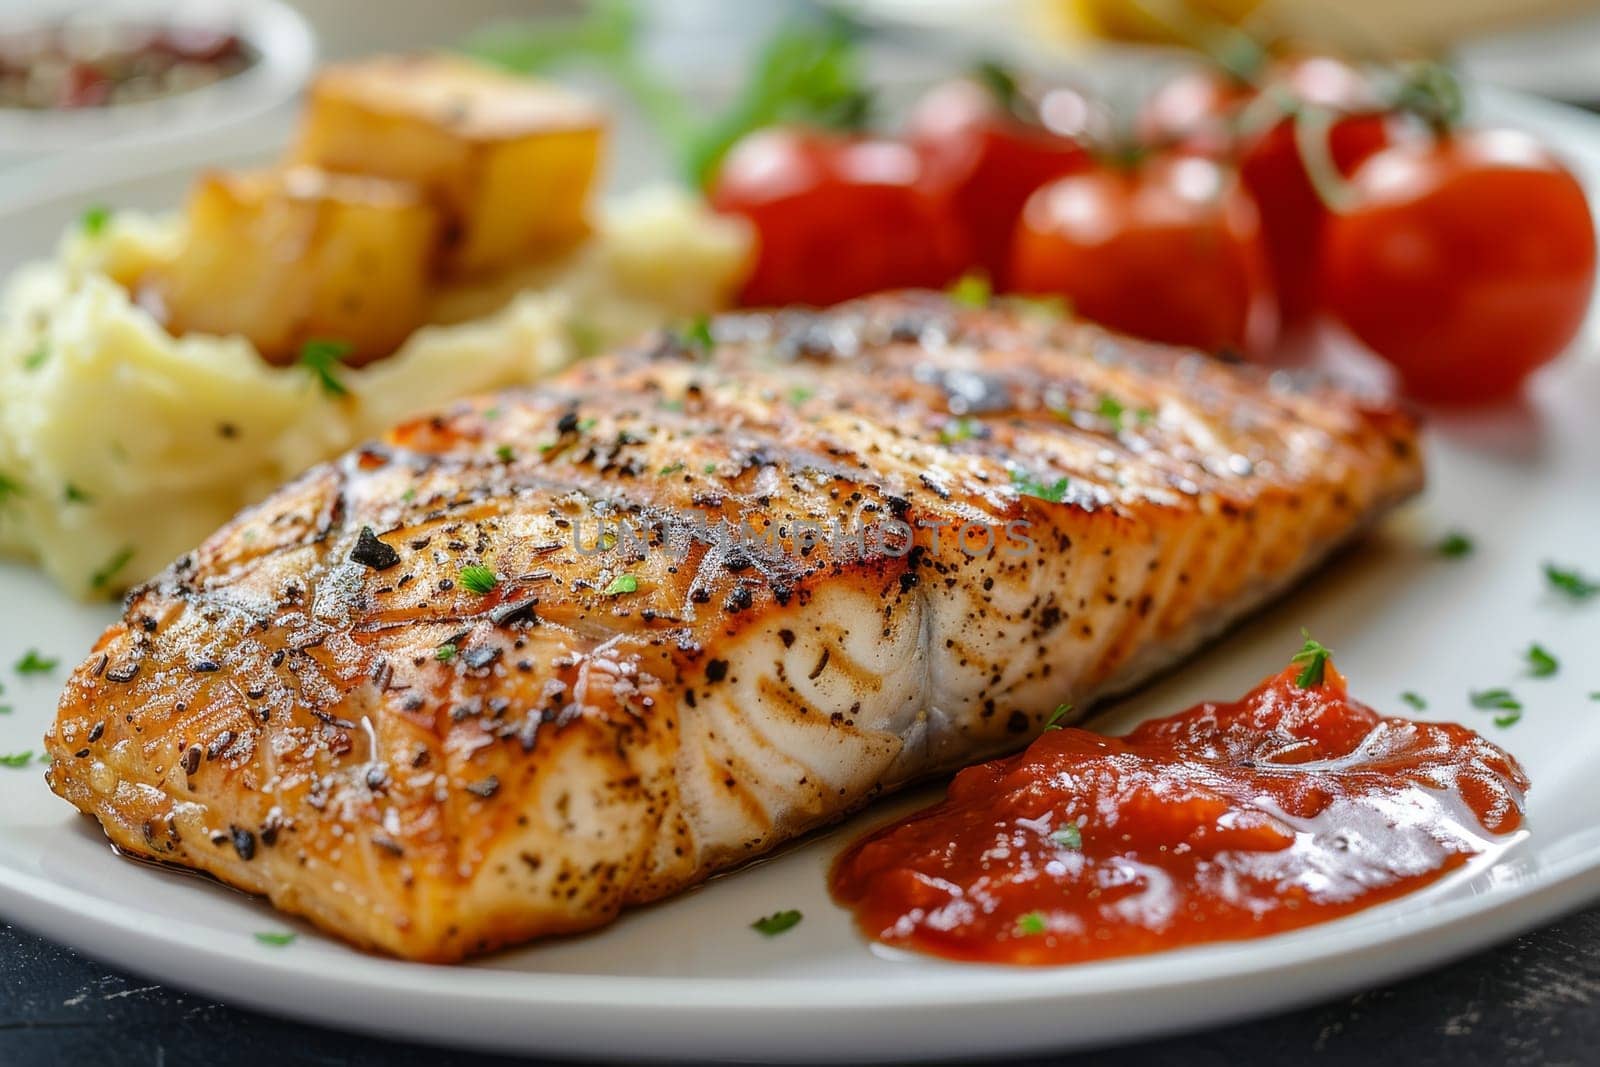 A fish fillet is served with a side of tomatoes and lemon. The fish is seasoned with pepper and lemon juice